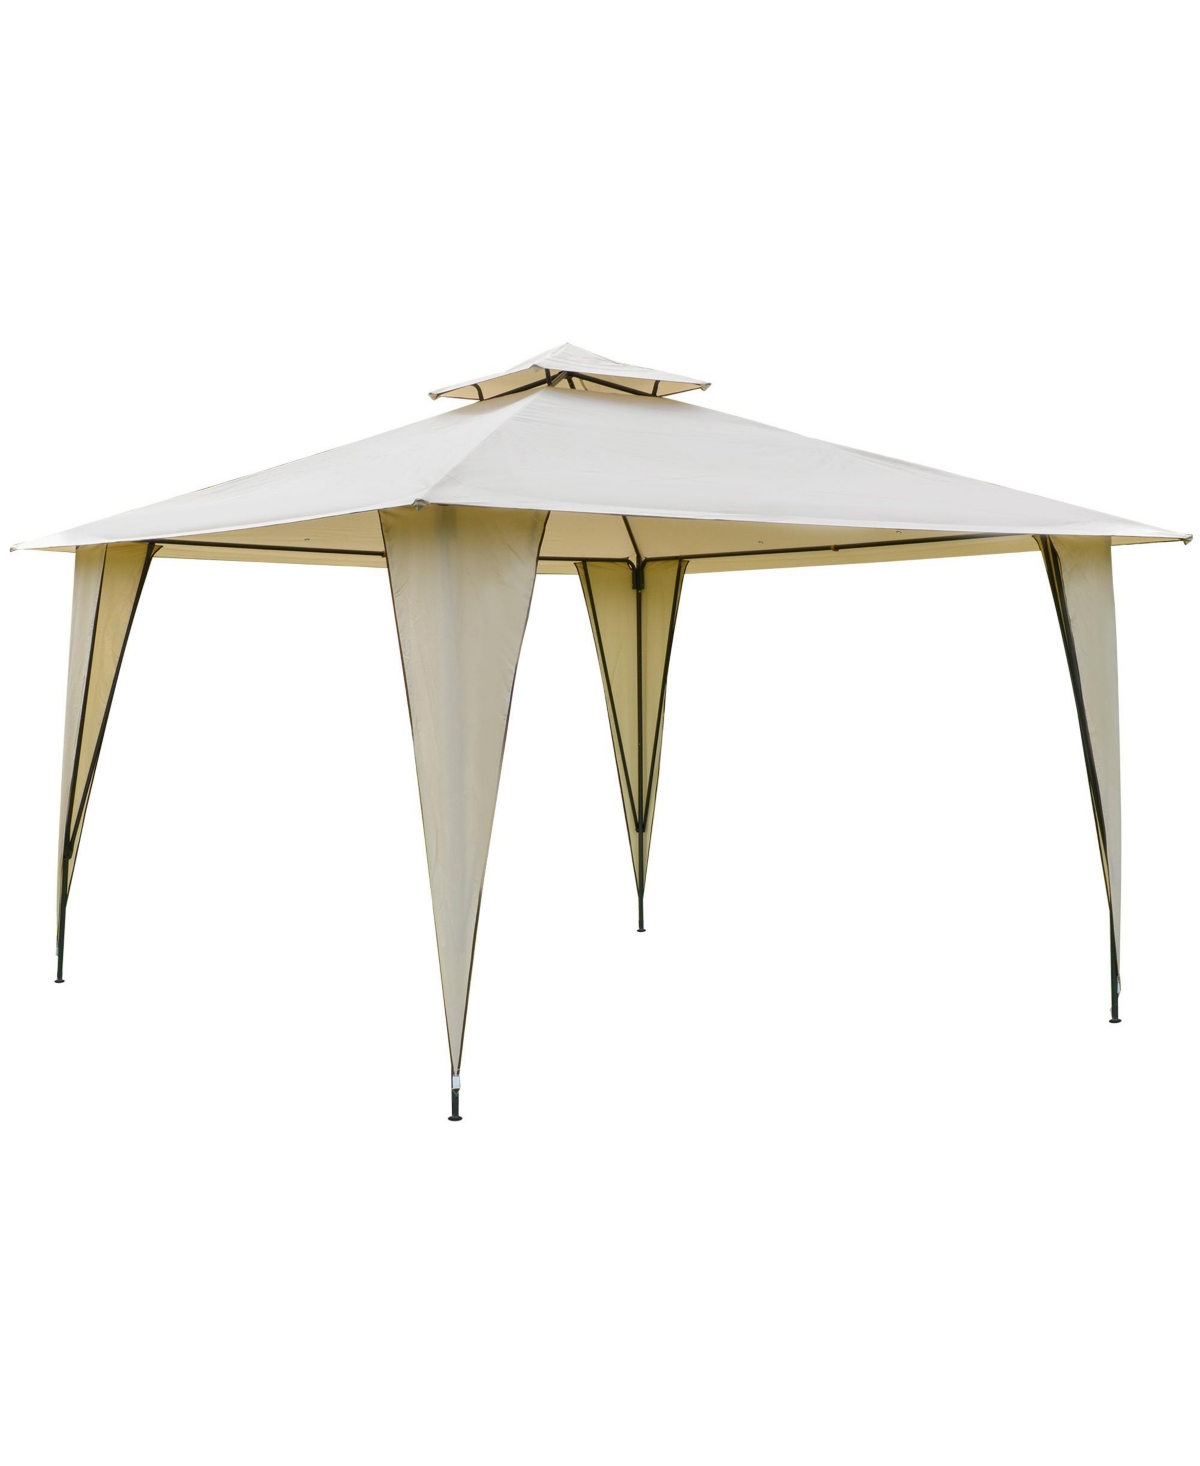 11' x 11' Outdoor Canopy Tent Party Gazebo with Double-Tier Roof, Steel Frame, Included Ground Stakes, Beige - Beige